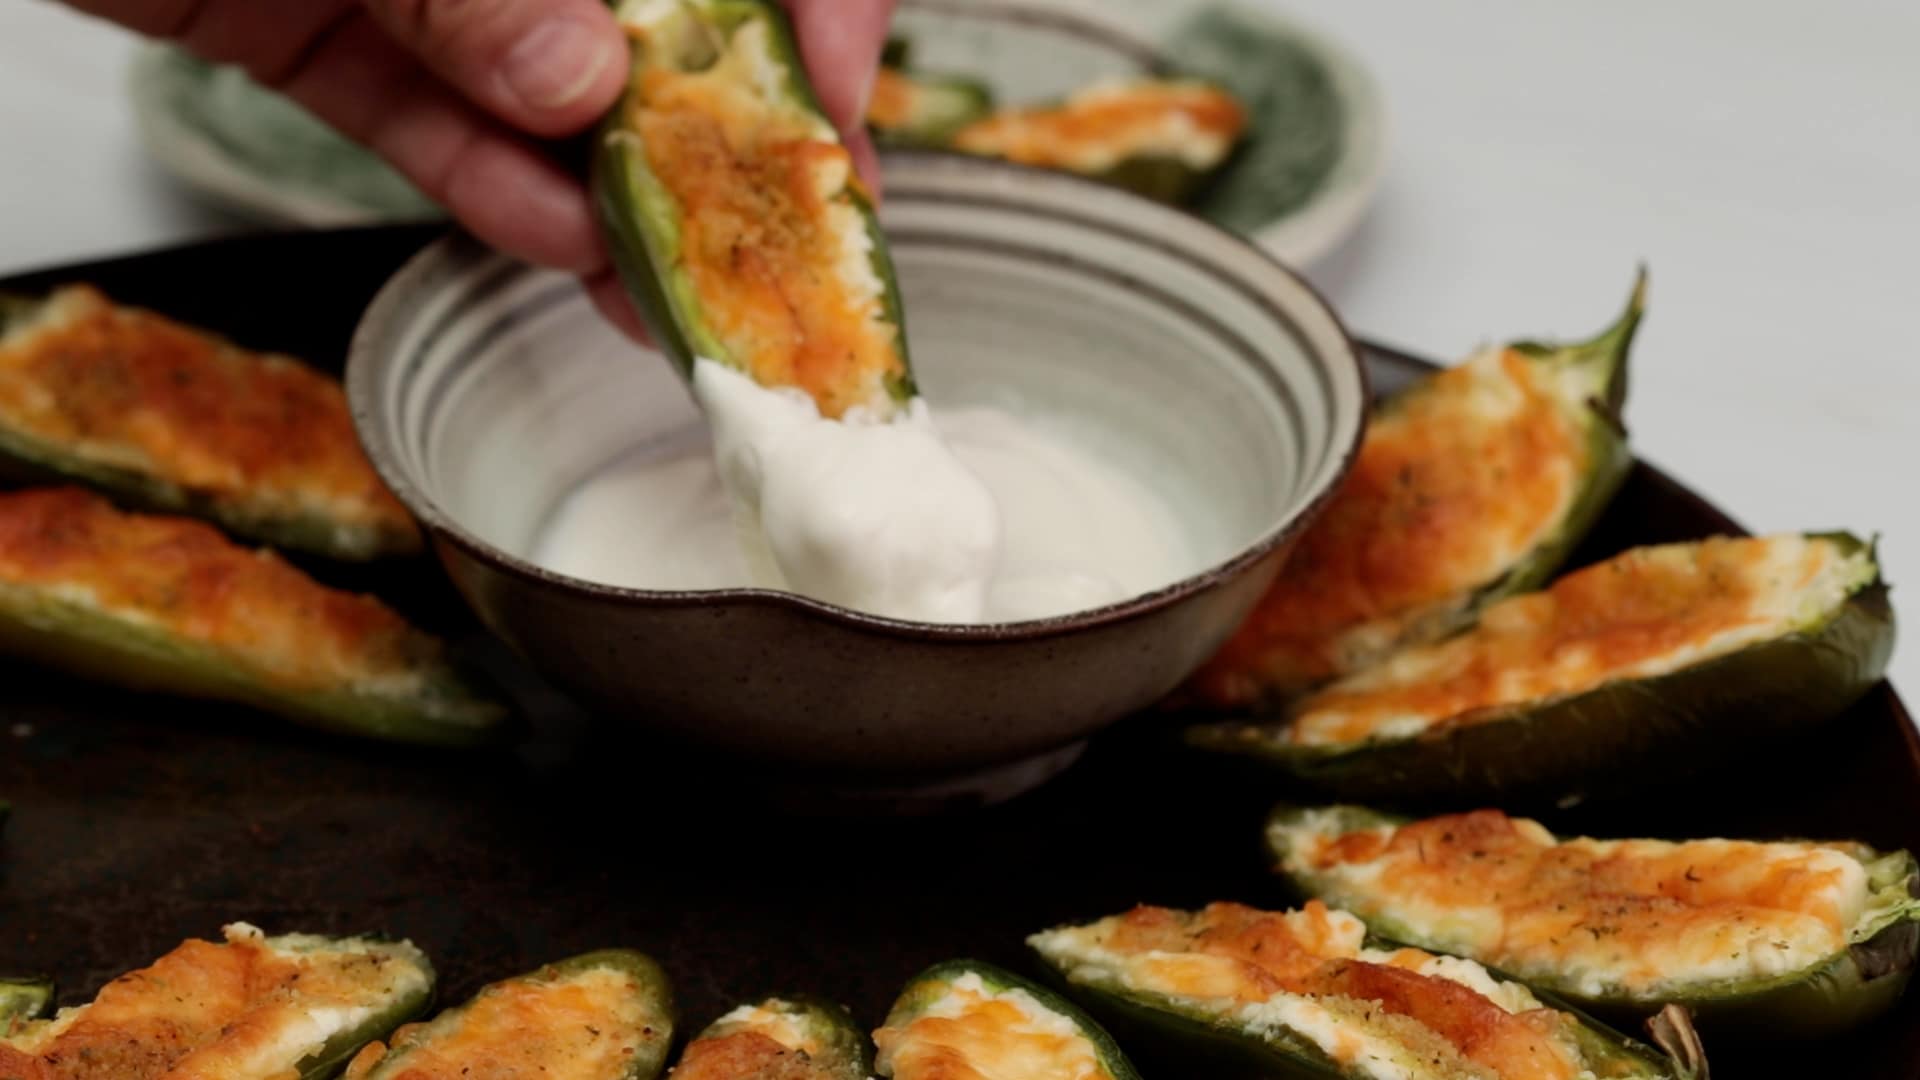 Spicy, cheesy jalapeño poppers are great dipped in cooling sour cream!